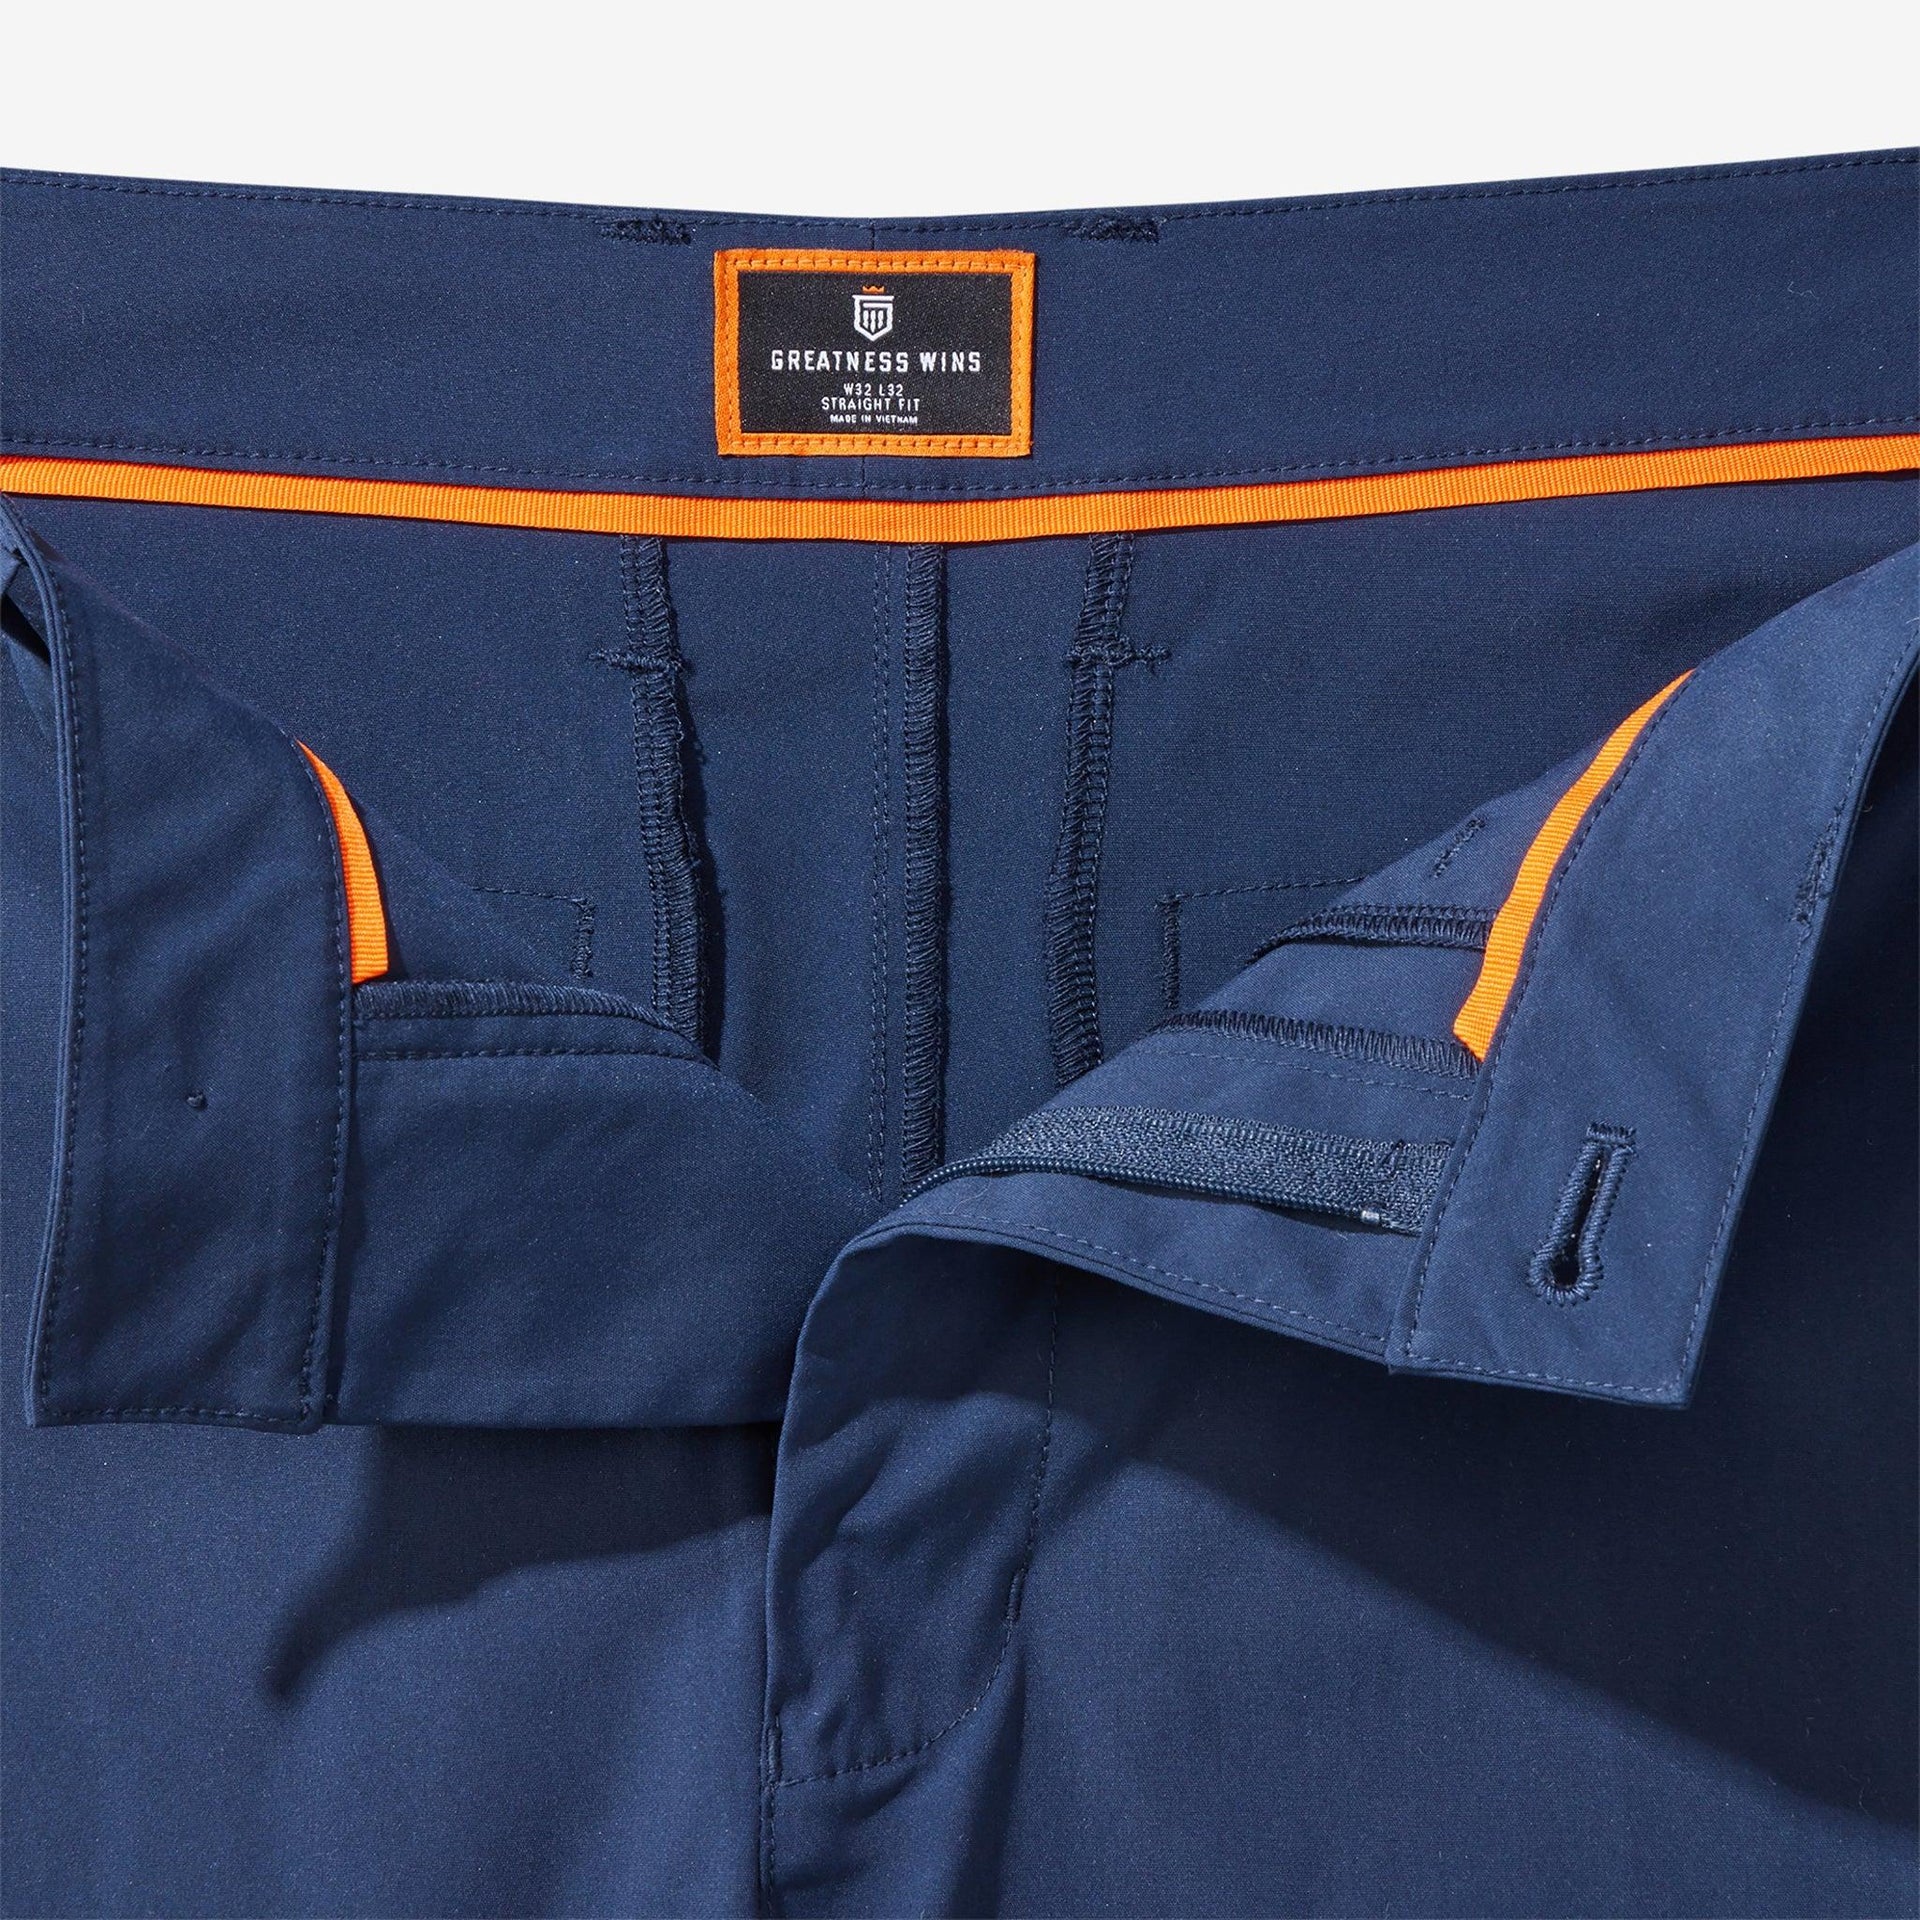 clubhouse pant Navy 33x30